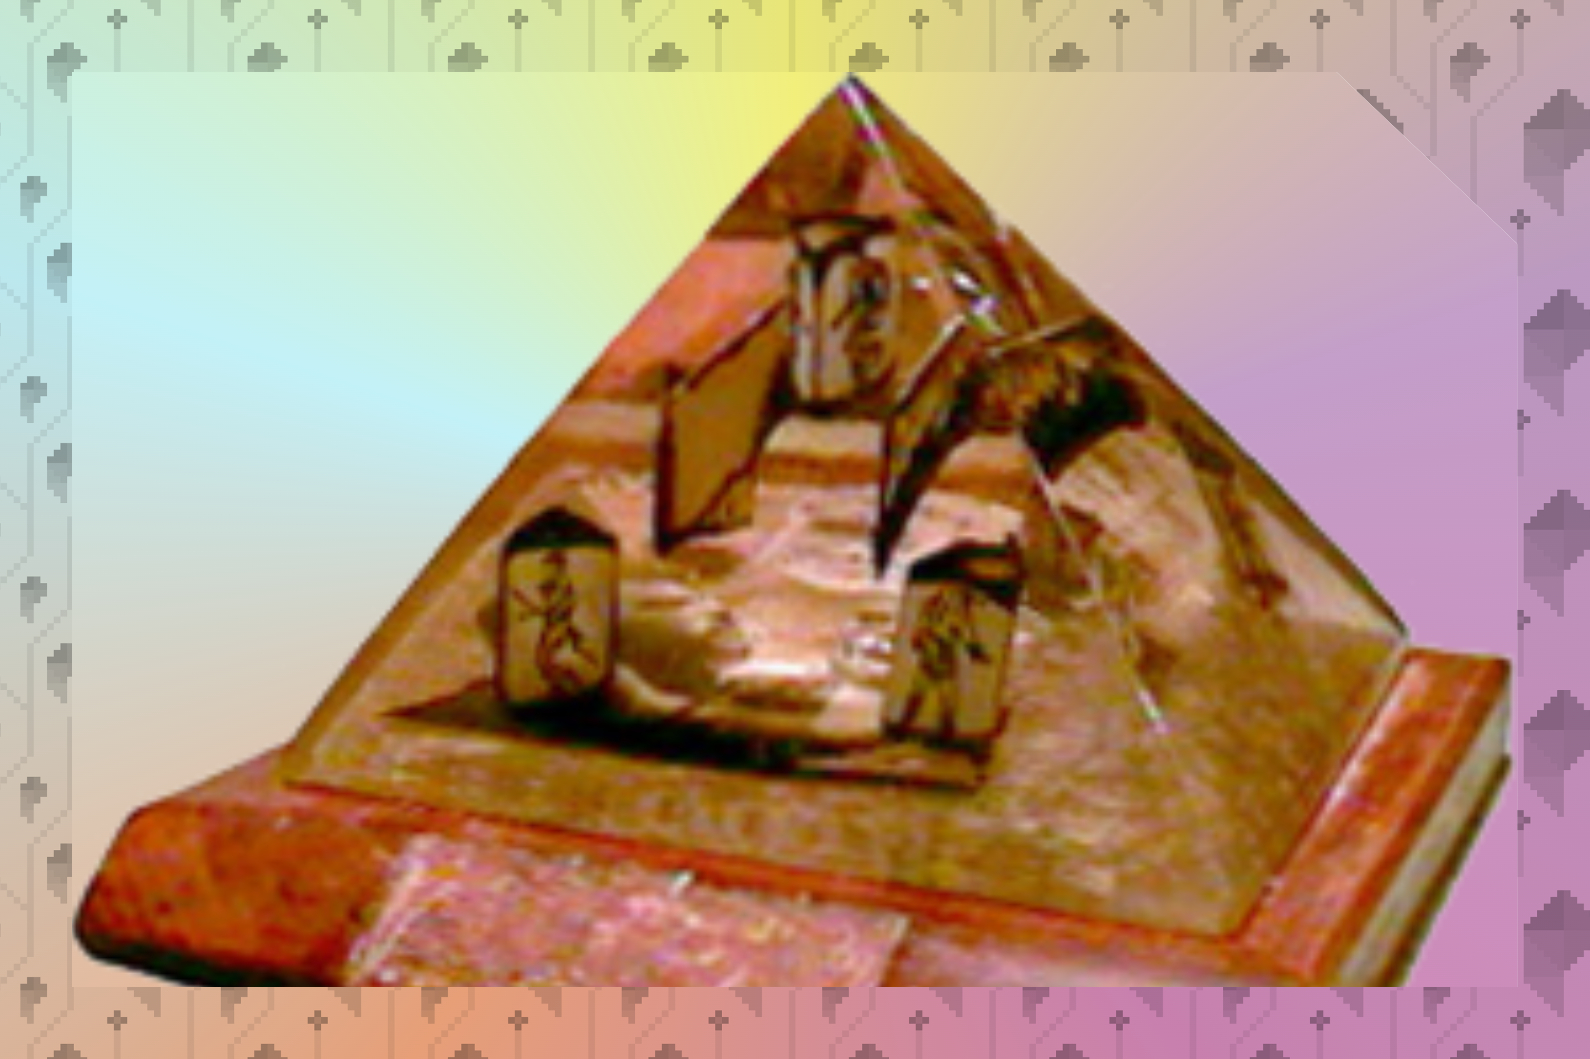 The Diana Jones award, which is now lost. It’s in a triangle shape and includes the burnt remains of the Indiana Jones RPG